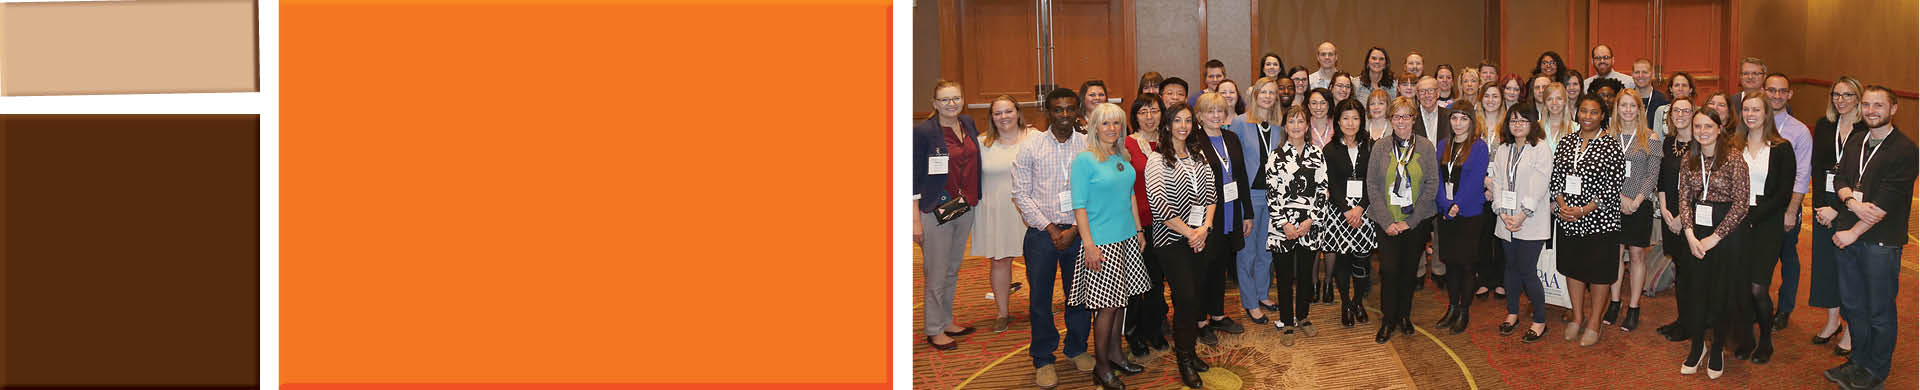 Faculty, alumni, staff and students at PAA 2018 annual meeting in Denver